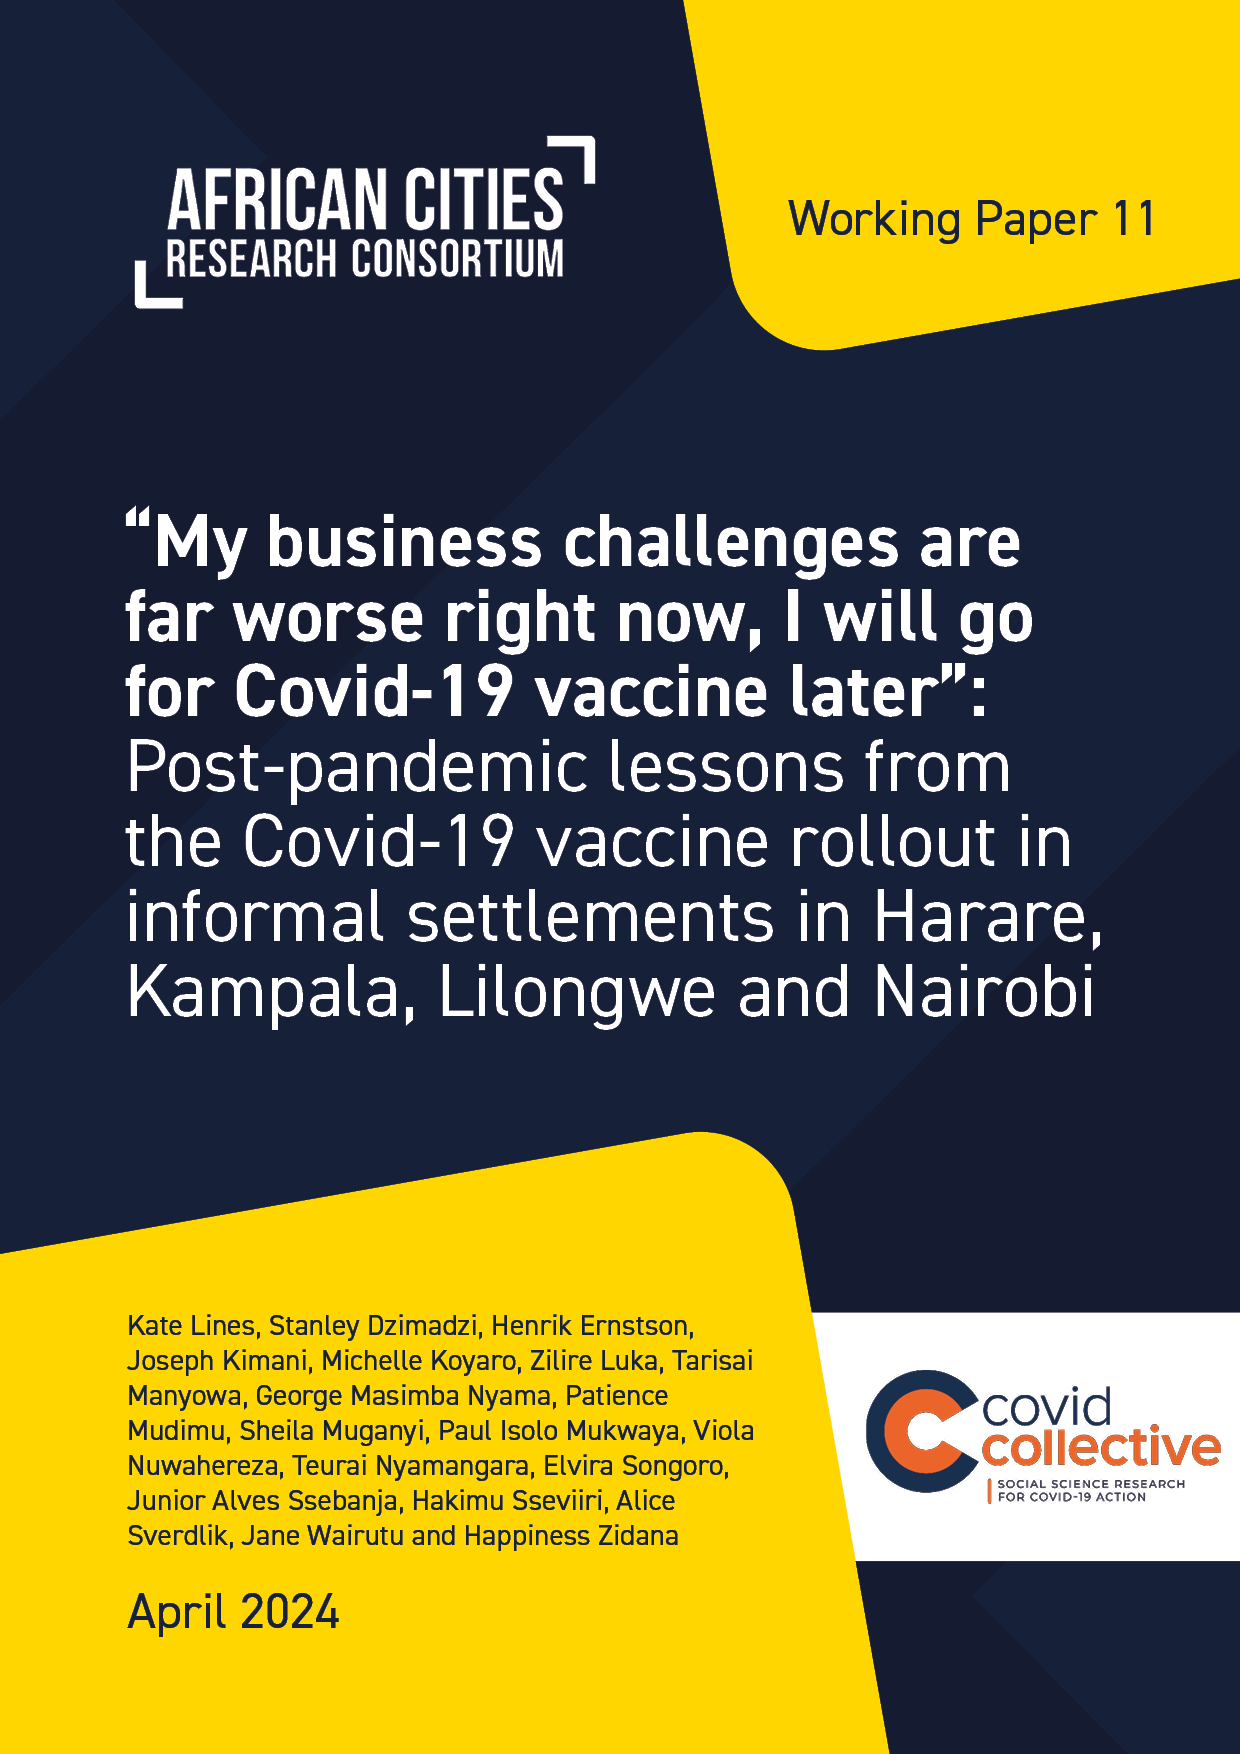 Working Paper 11 | "My business challenges are far worse right now, I will go for Covid-19 vaccine later": Post-pandemic lessons from the Covid-19 vaccine rollout in Harare, Kampala, Lilongwe and Nairobi